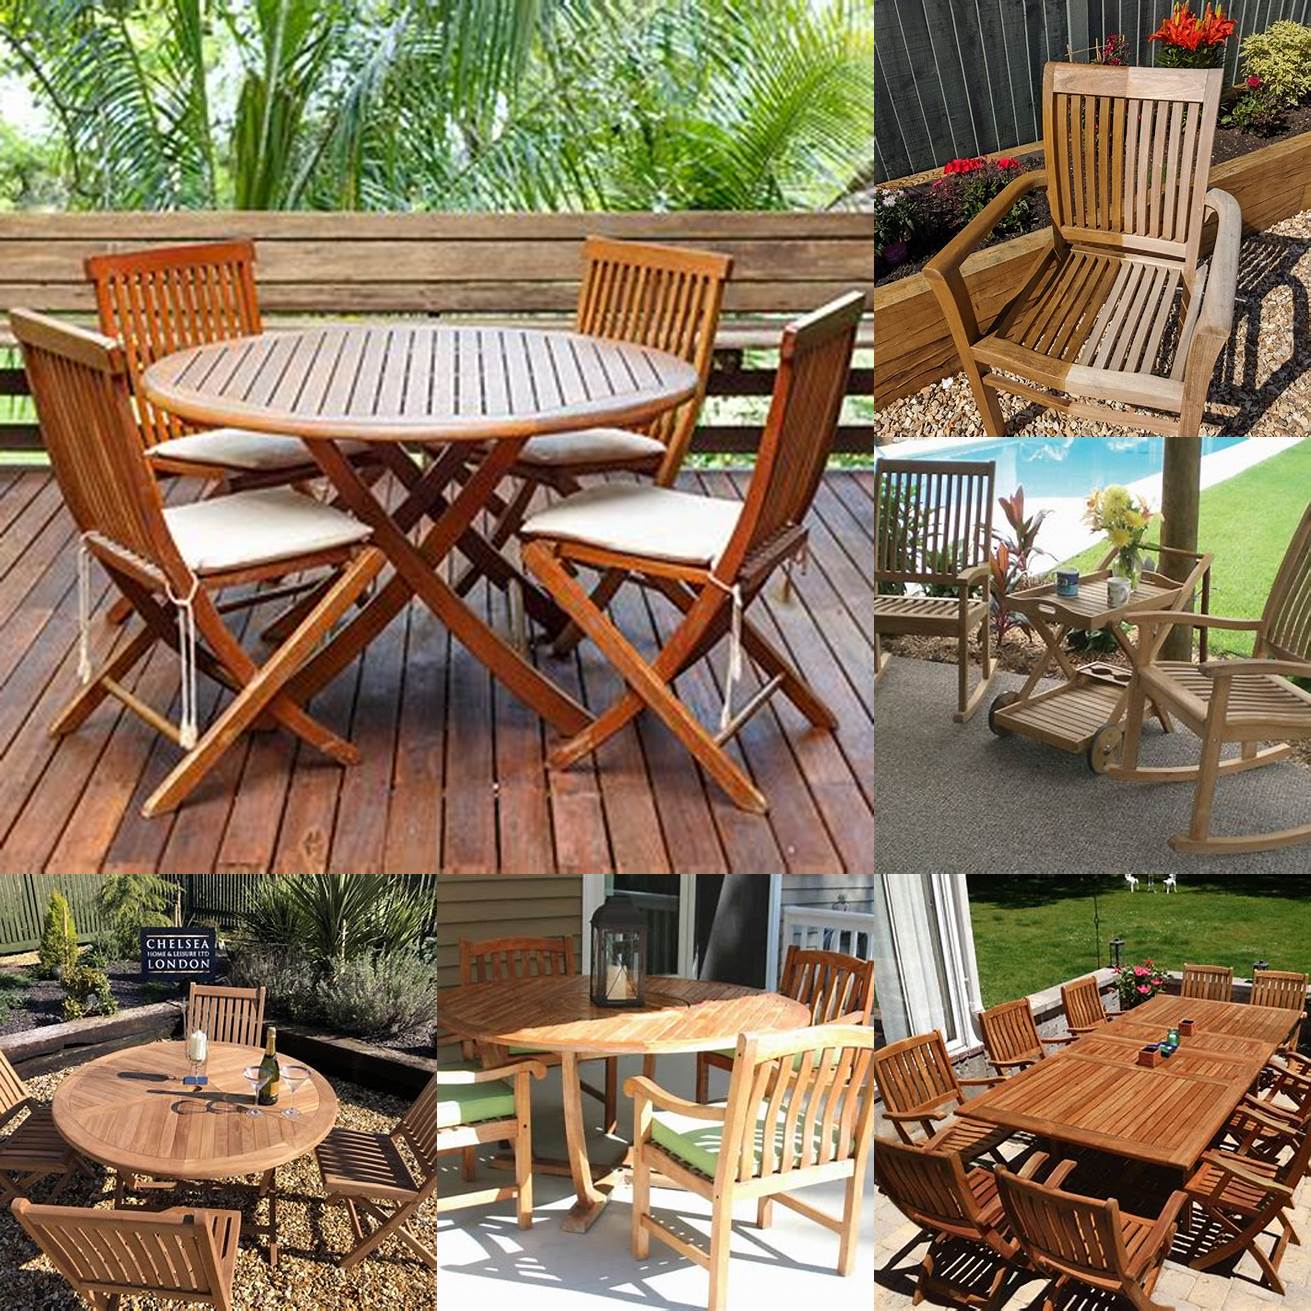 Protect Your Teak Furniture from the Sun